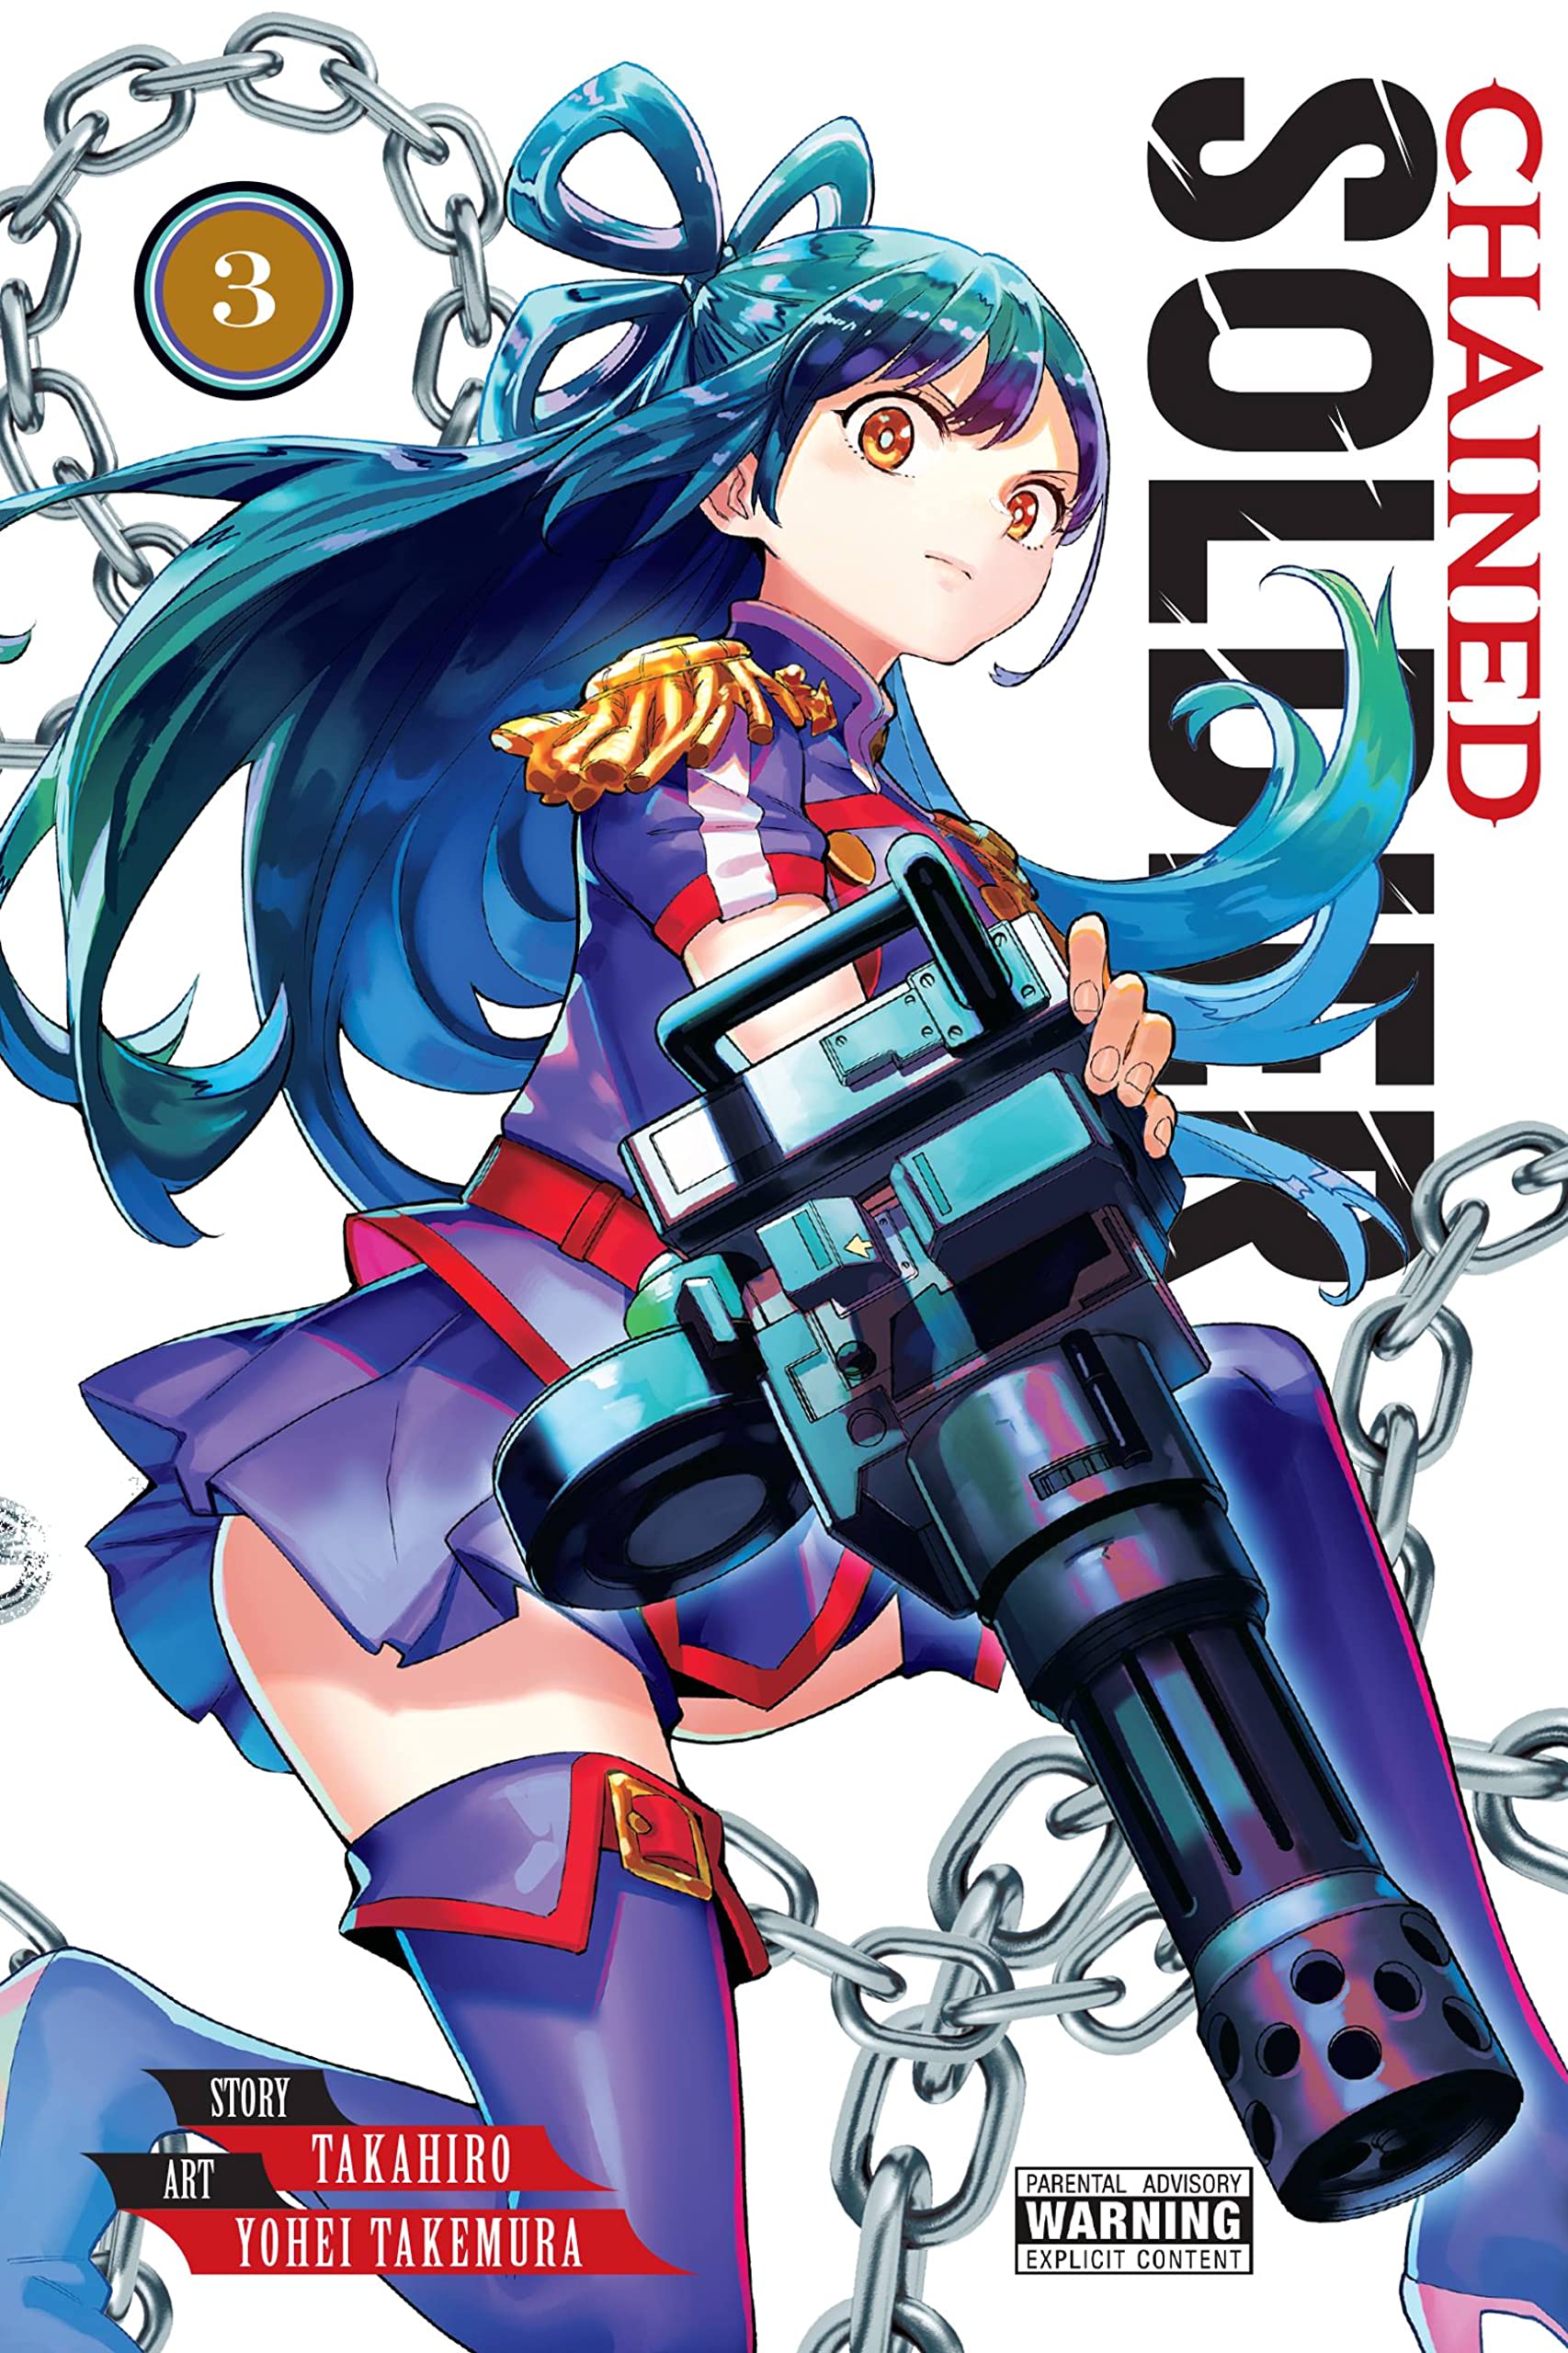 Chained Soldier Vol. 03